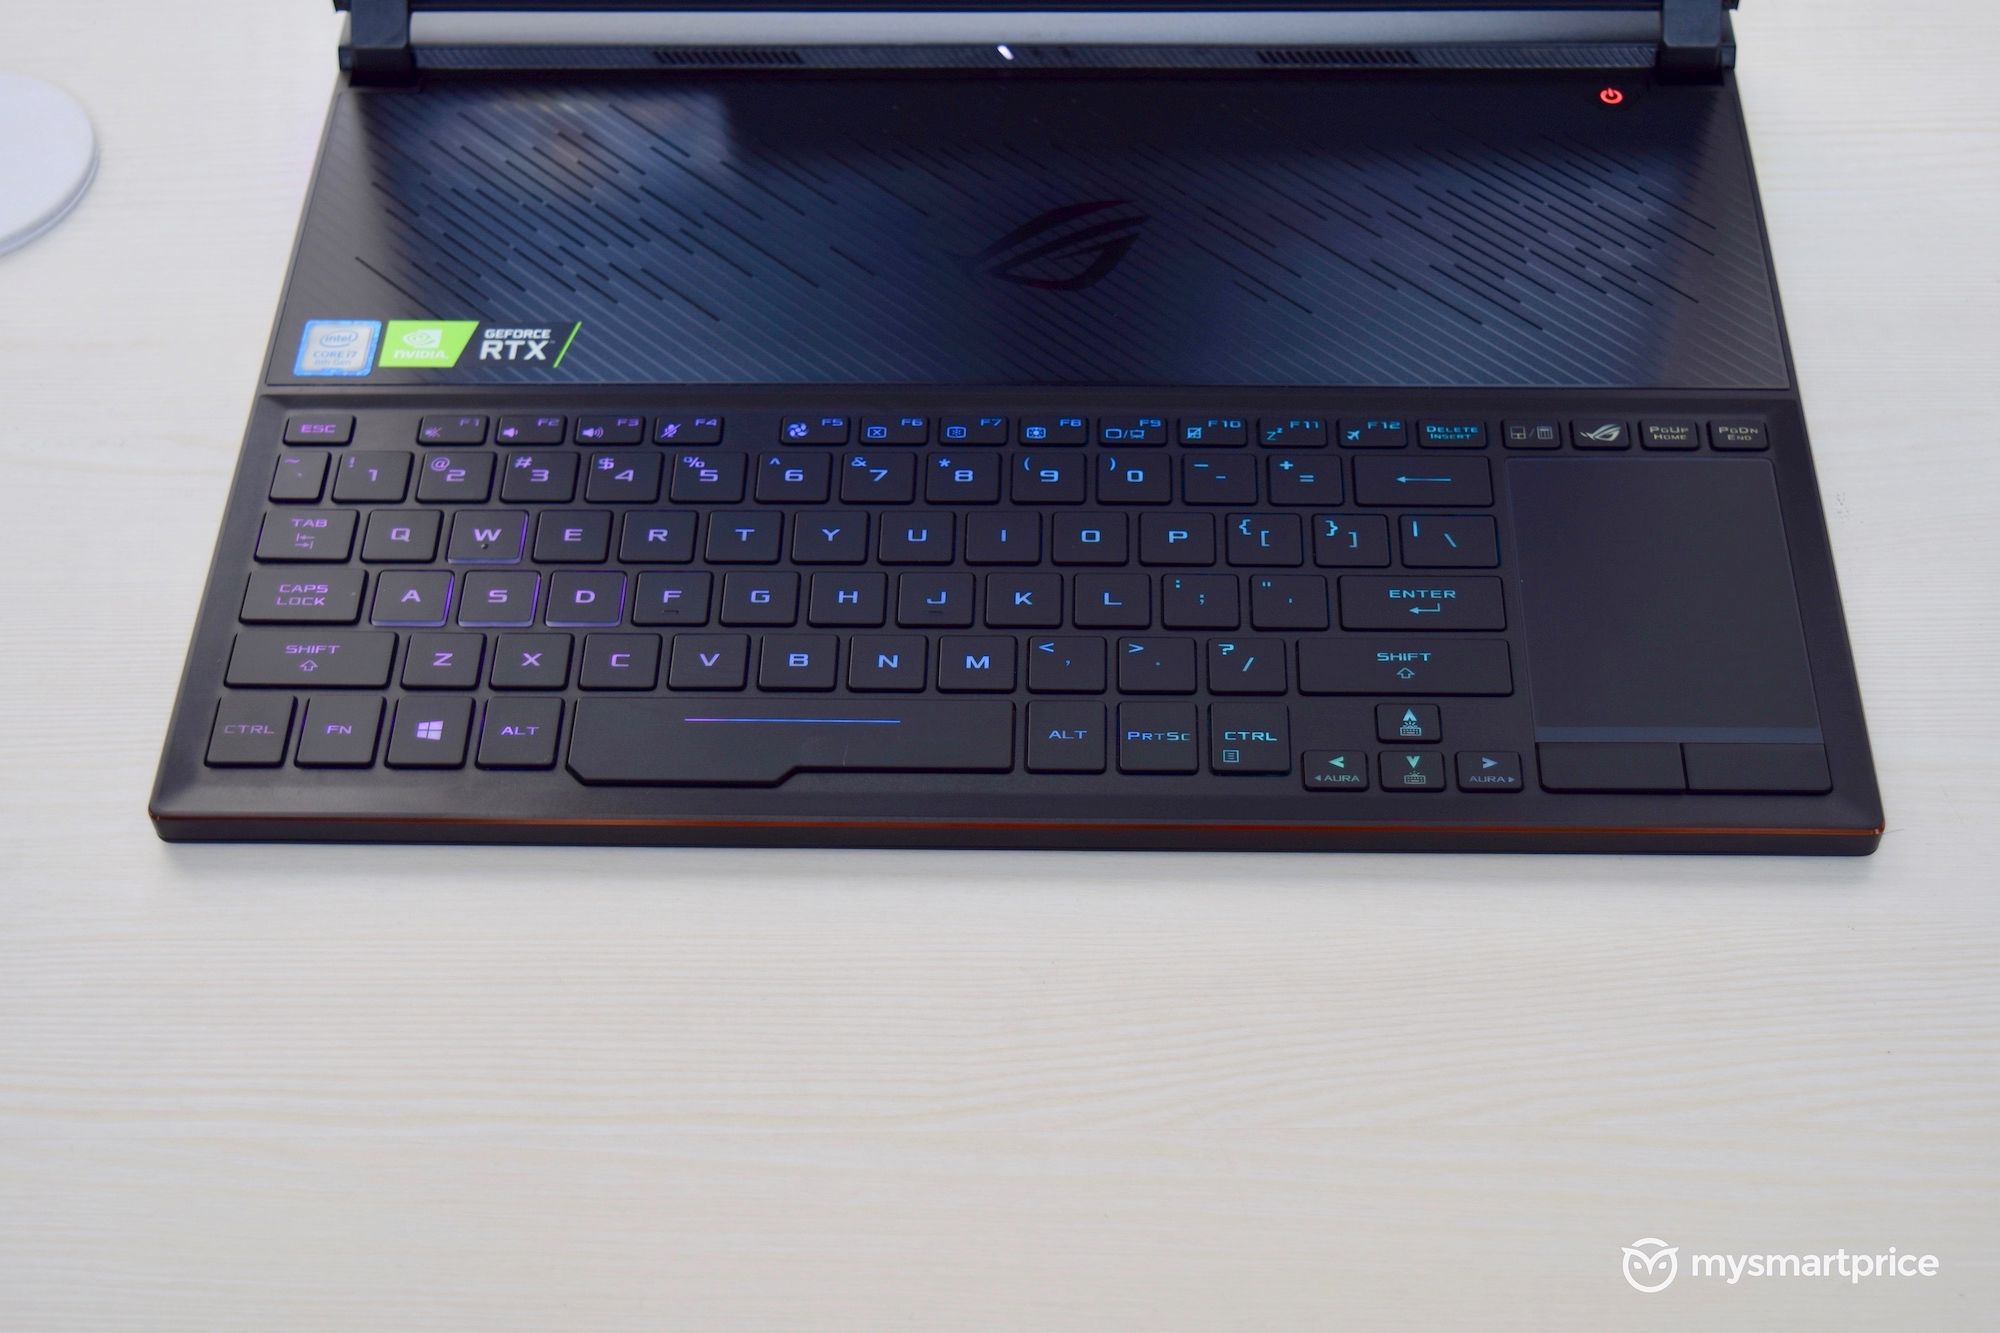 ASUS Zephyrus S GX531GW Review: Thin & Light Laptop That Can Play High